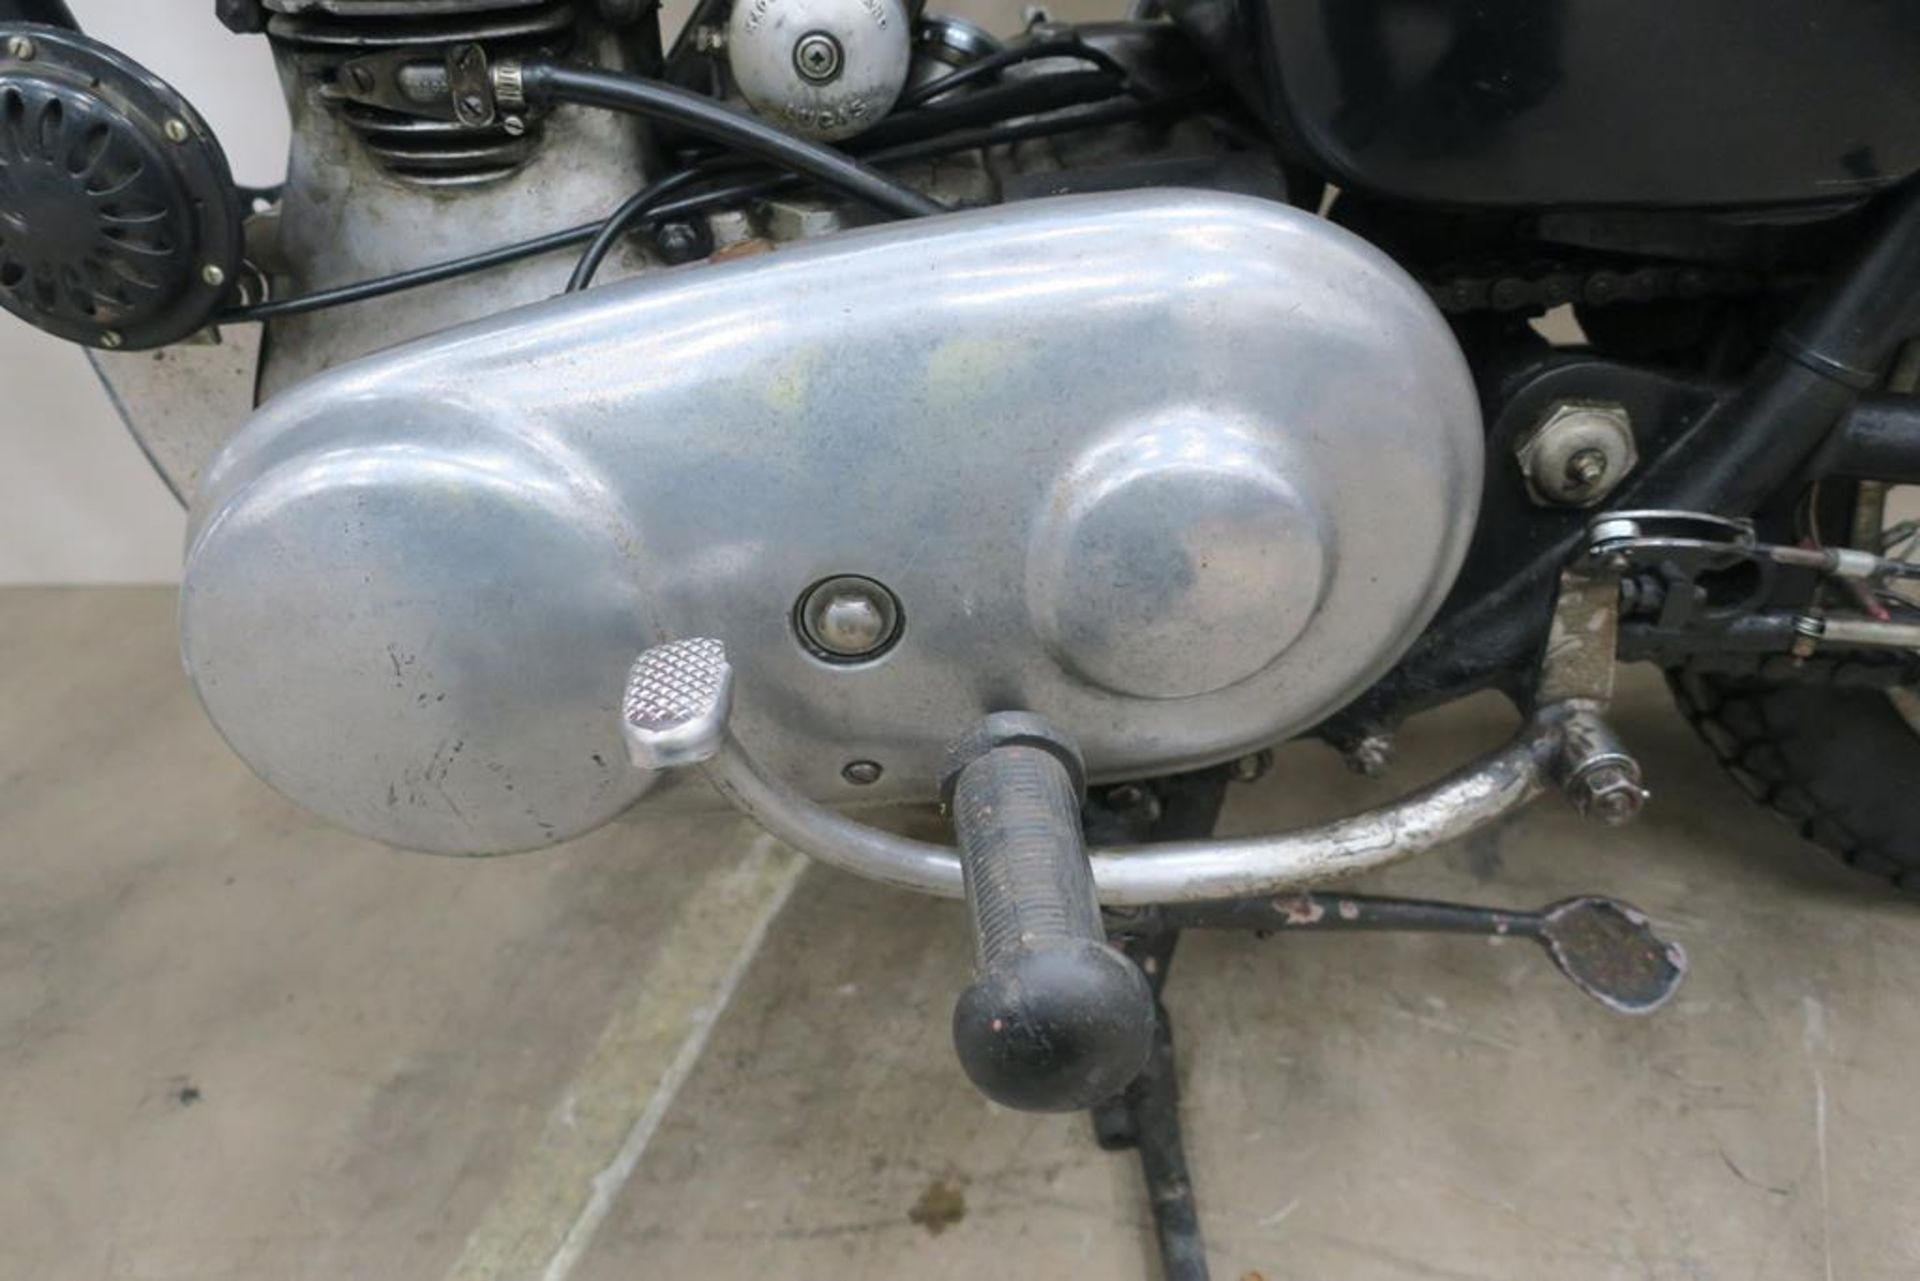 A Royal Enfield Motorcycle - Image 15 of 18